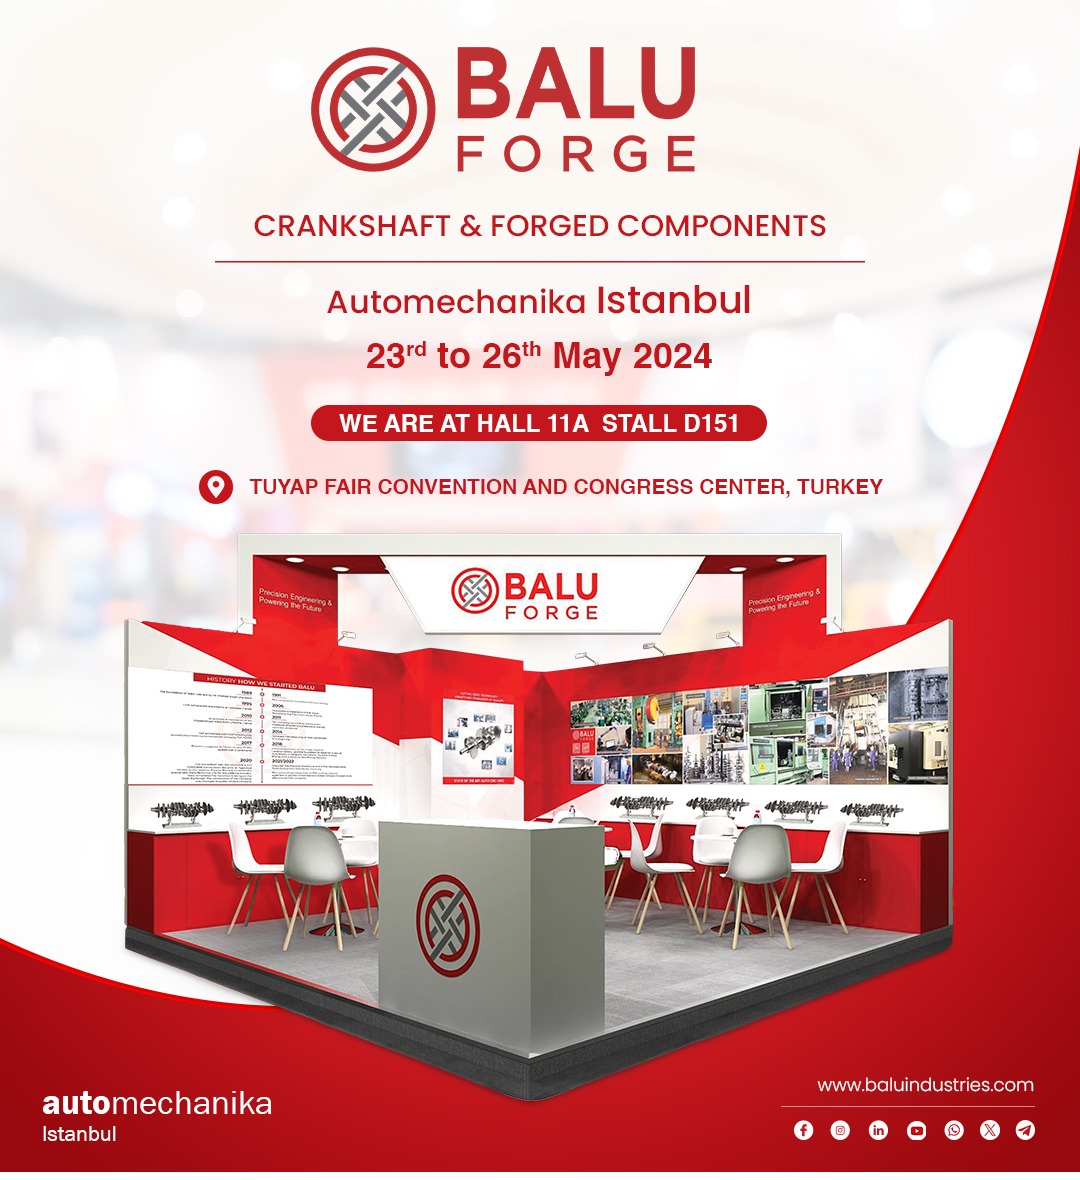 We cordially invite you to Automechanika Istanbul Exhibition at the Tuyap Fair Convention and Congress Centre, Turkey, from May 23-26, 2024 at Hall 11A, Stand D151. Looking forward to seeing you there! #automechanika2023 #Baluforge #Exhibition #Engineers #Turkey #Forging